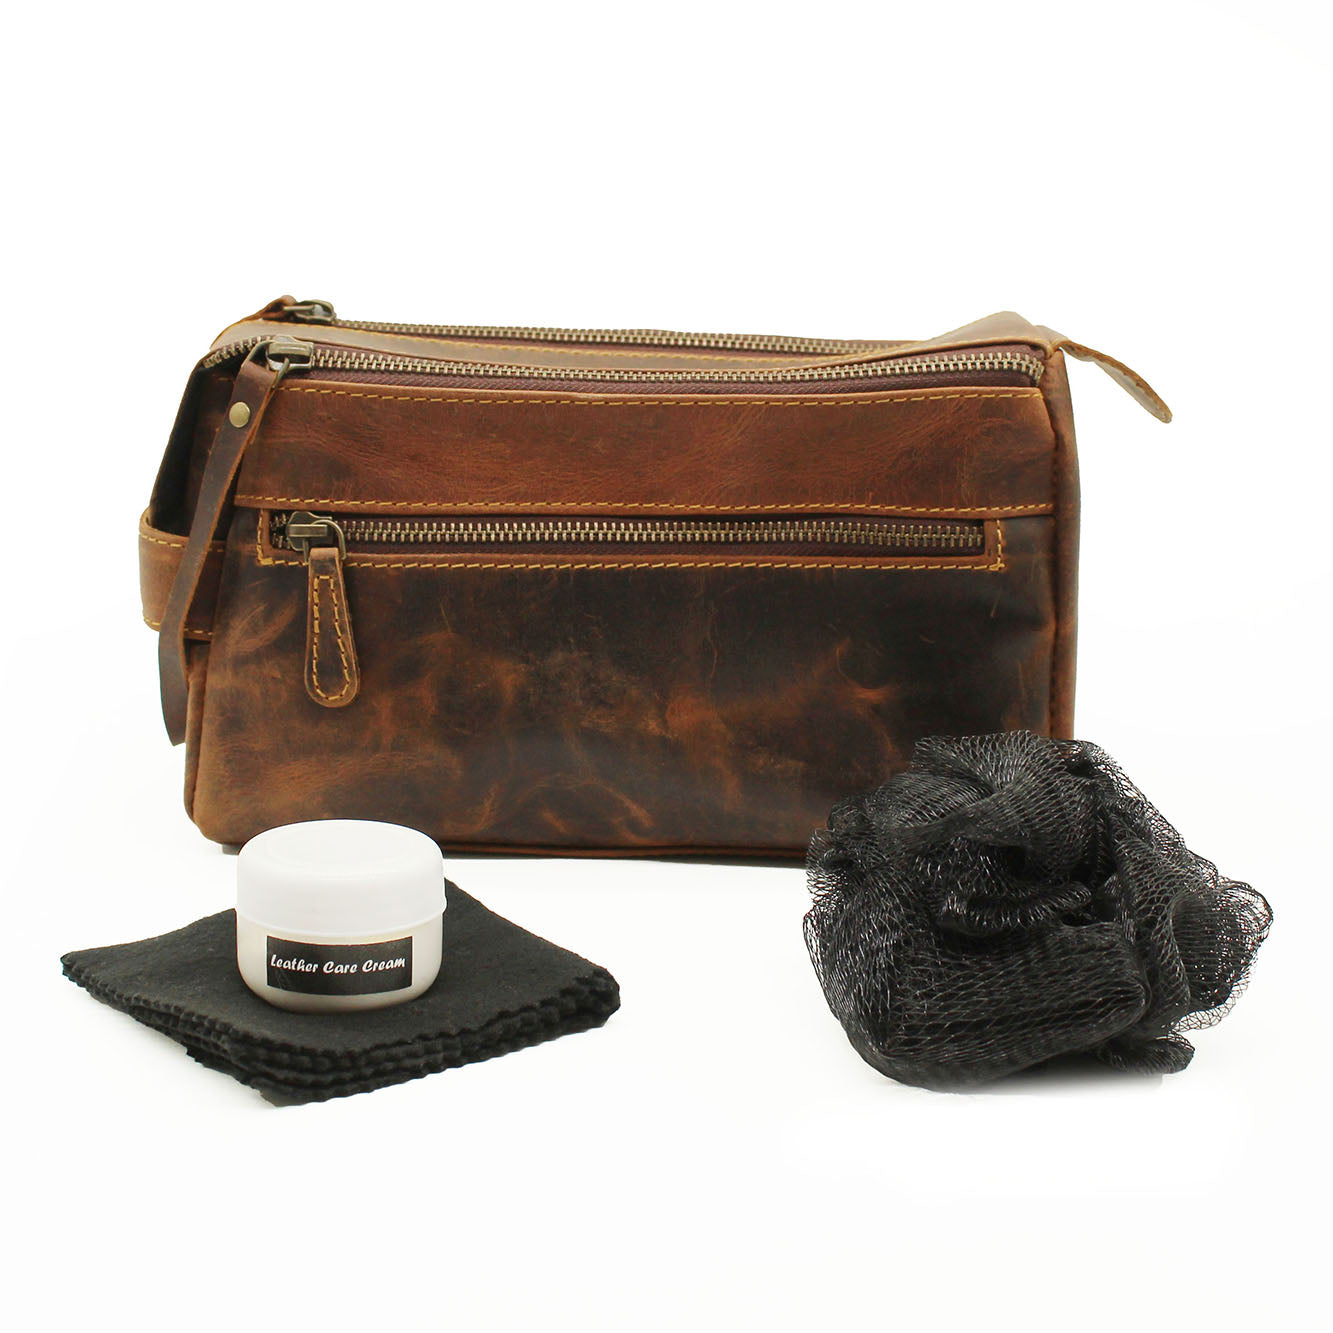 Gift Set Toiletry Bag Buffalo Leather with Leather Care Cream